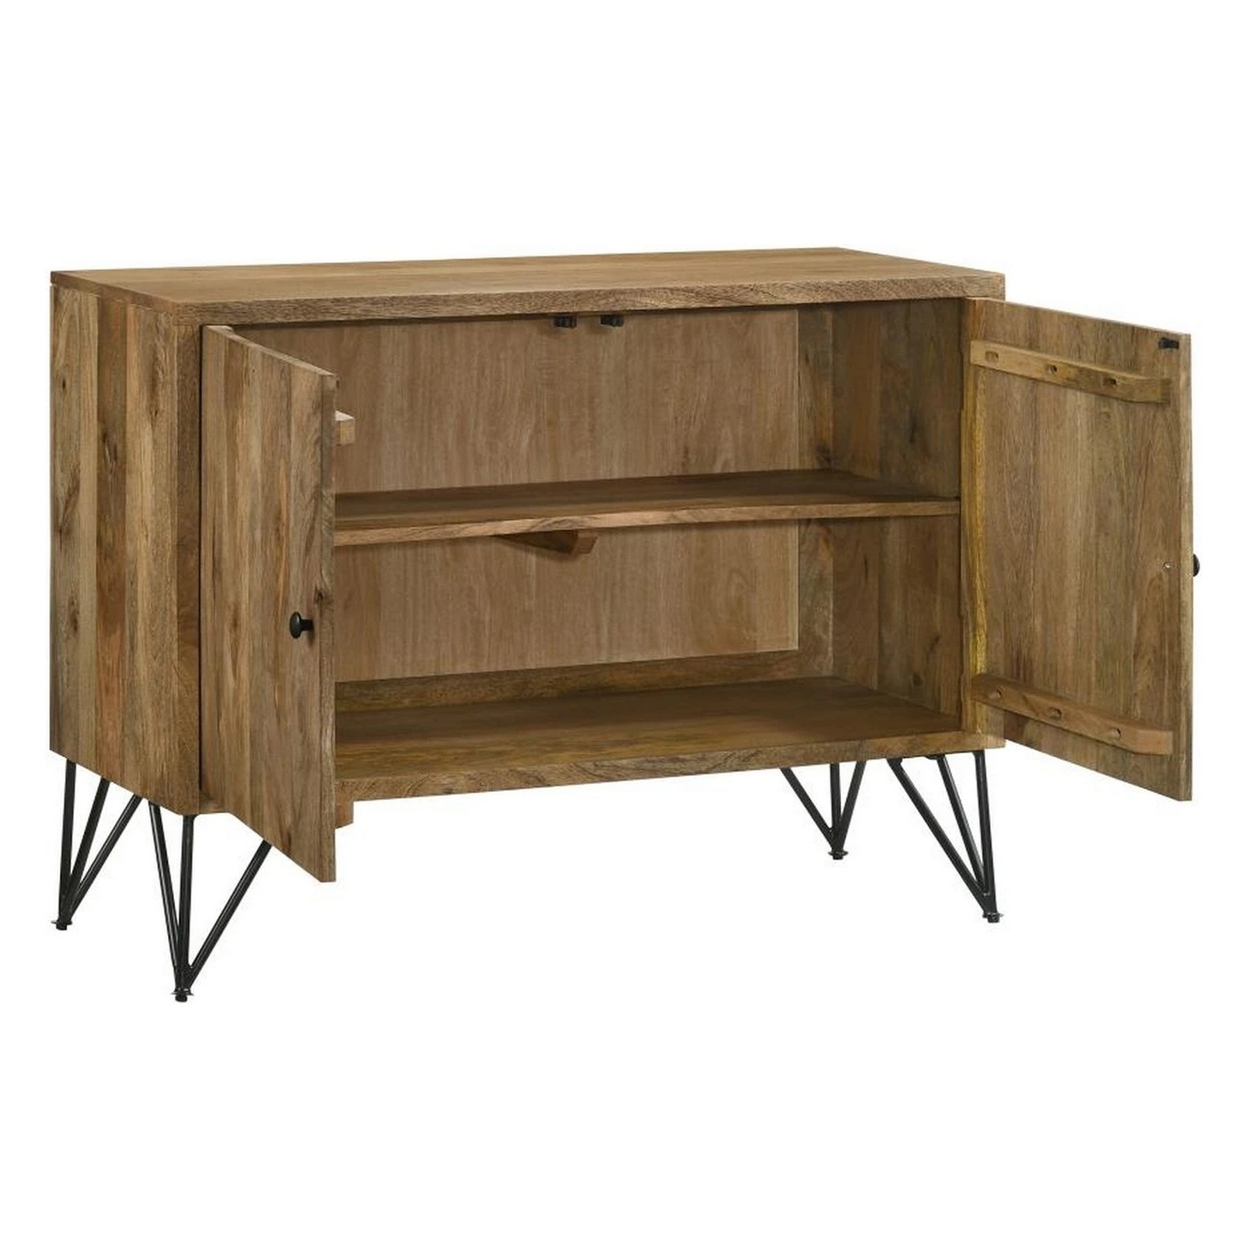 40 Inch Sideboard Cabinet Console, 2 Door, Angled Iron Legs Natural Brown- Saltoro Sherpi